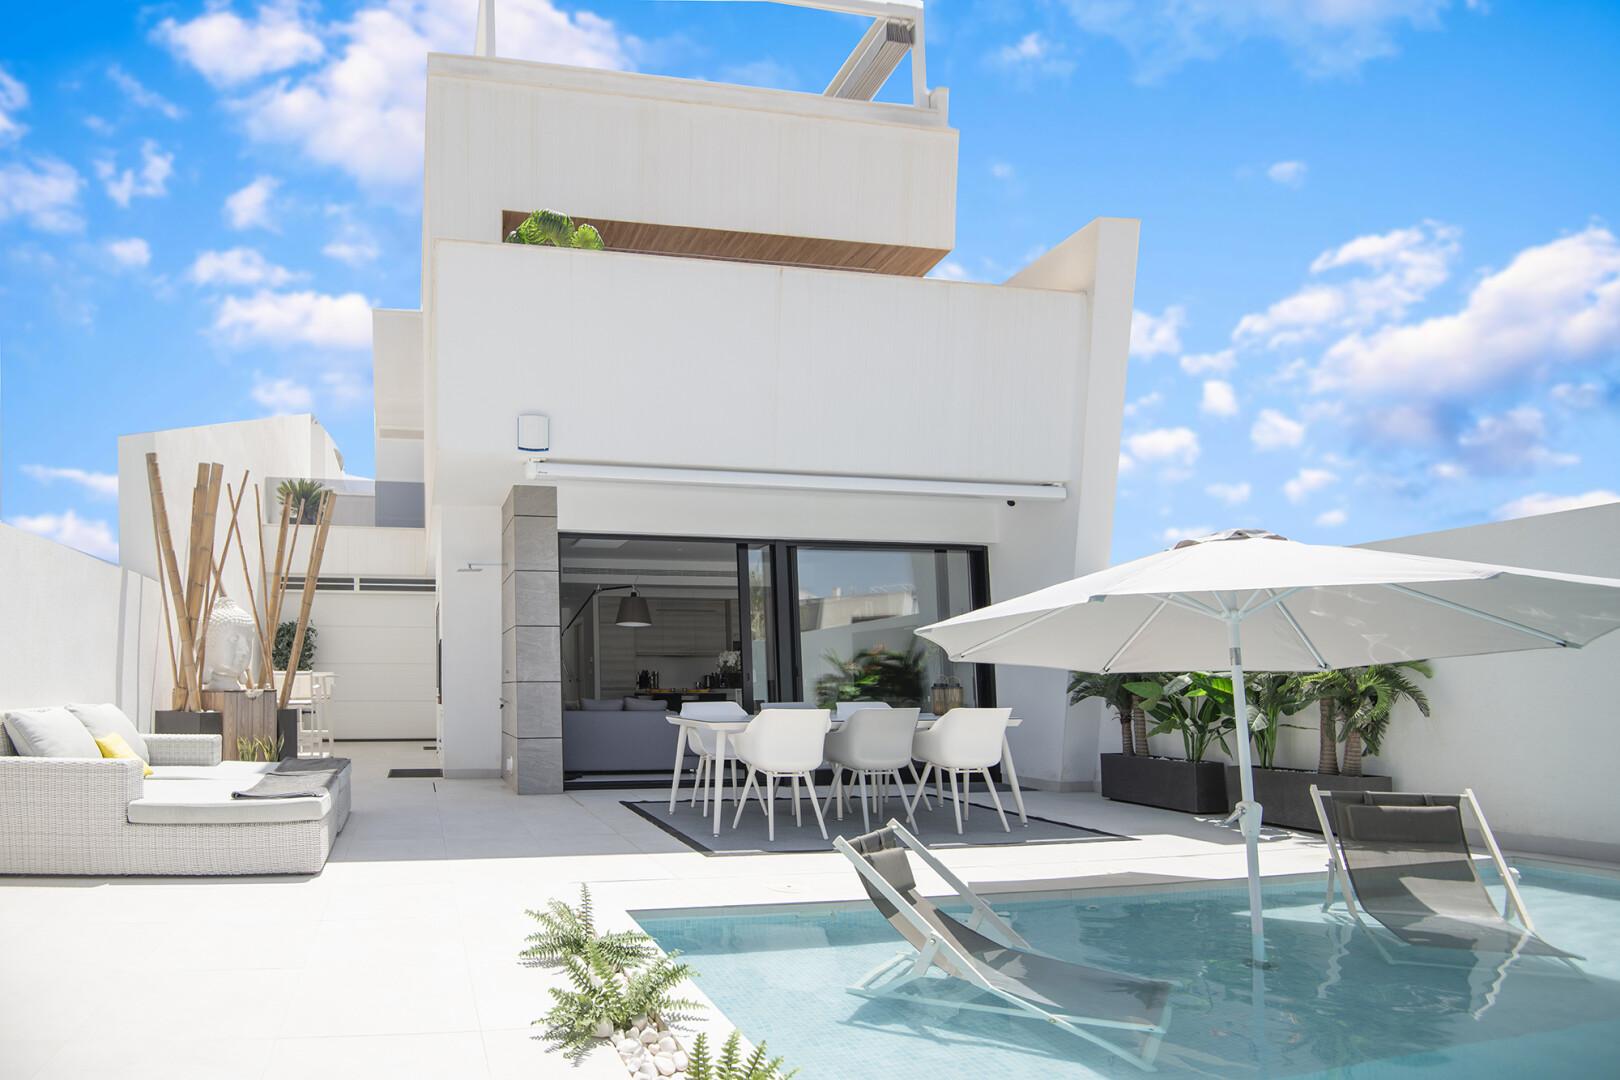 Brand-new luxury design villa for 4 people with private saltwater pool